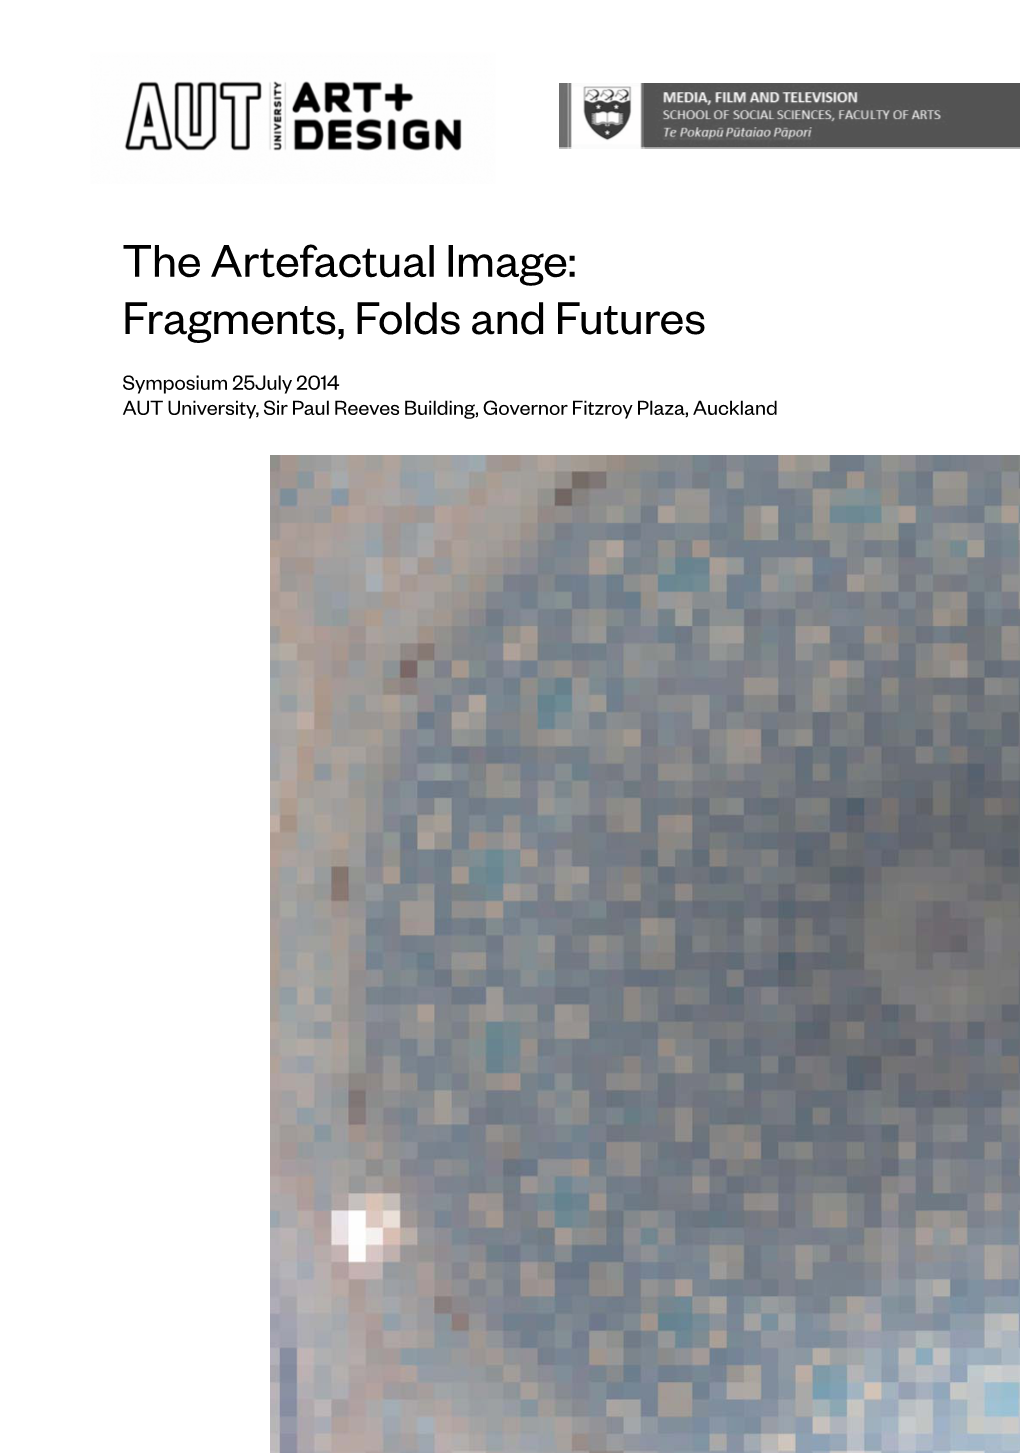 The Artefactual Image: Fragments, Folds and Futures